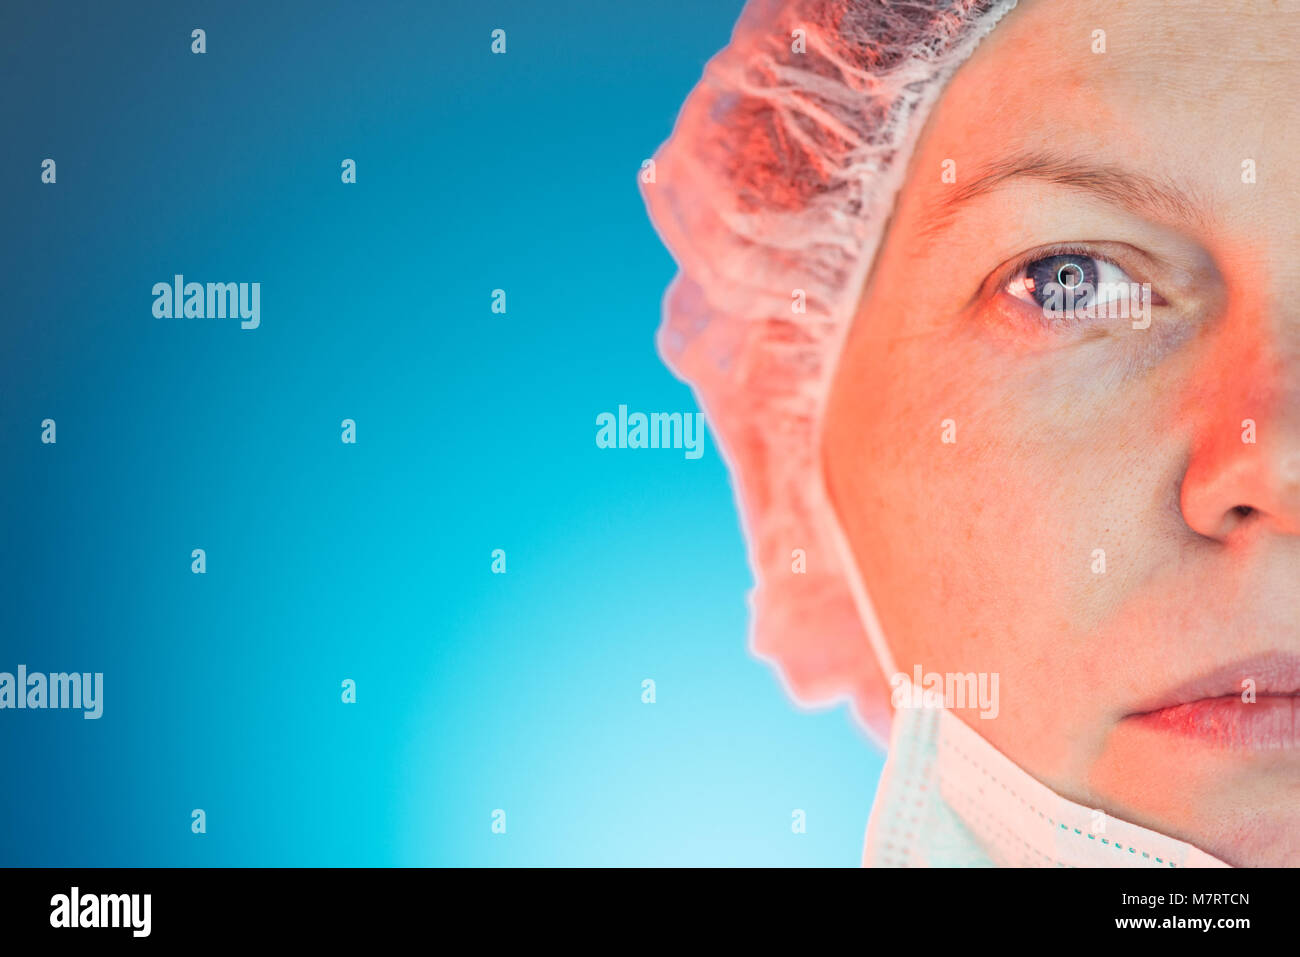 Half face portrait of female medical professional with surgical mask and cap looking at camera, copy space for text or graphic Stock Photo